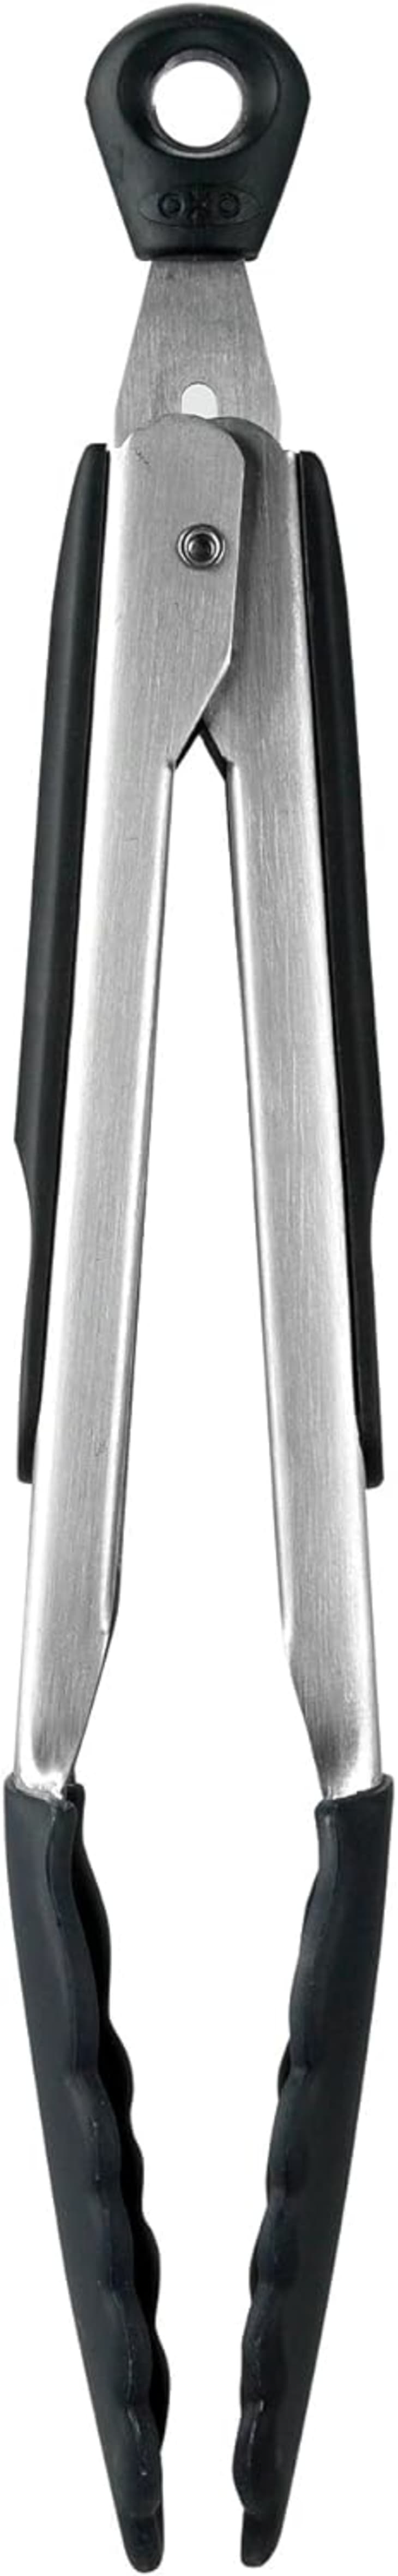 OXO Good Grips 9-Inch Tongs with Silicone Heads at Amazon